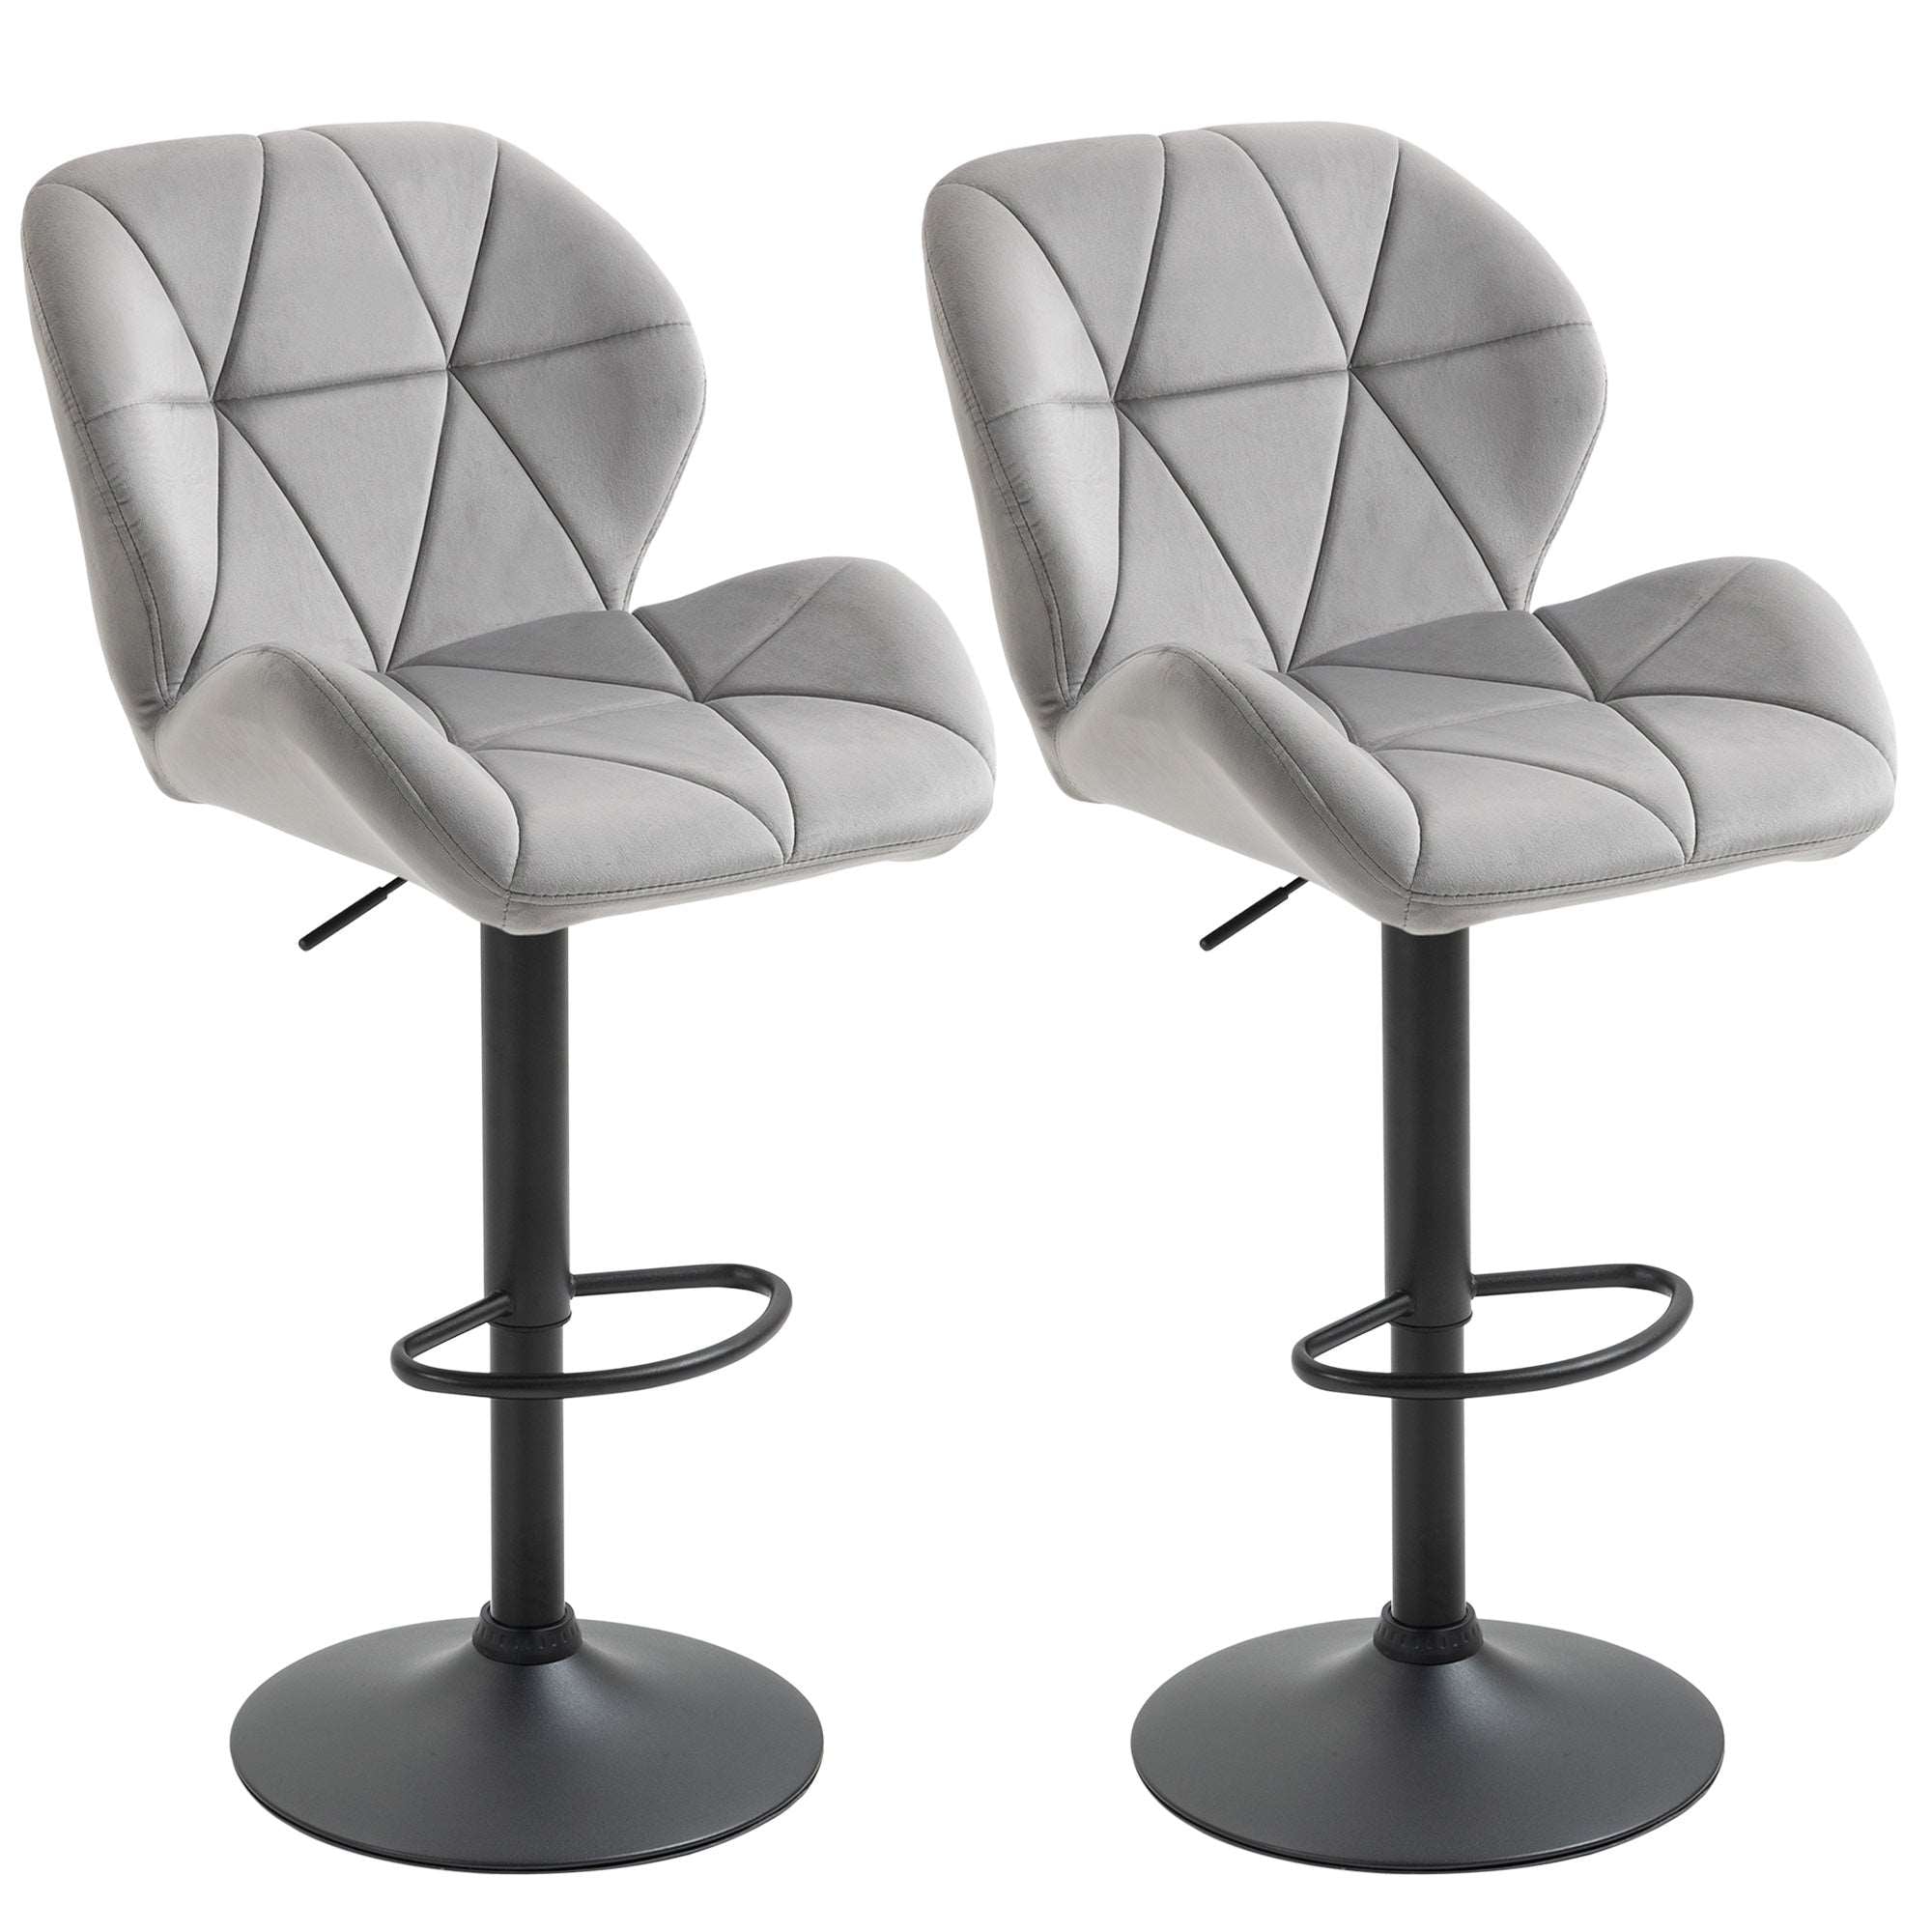 Bar Stool Set of 2 Fabric Adjustable Height Armless Upholstered Counter Chairs with Swivel Seat, Light Grey  AOSOM   